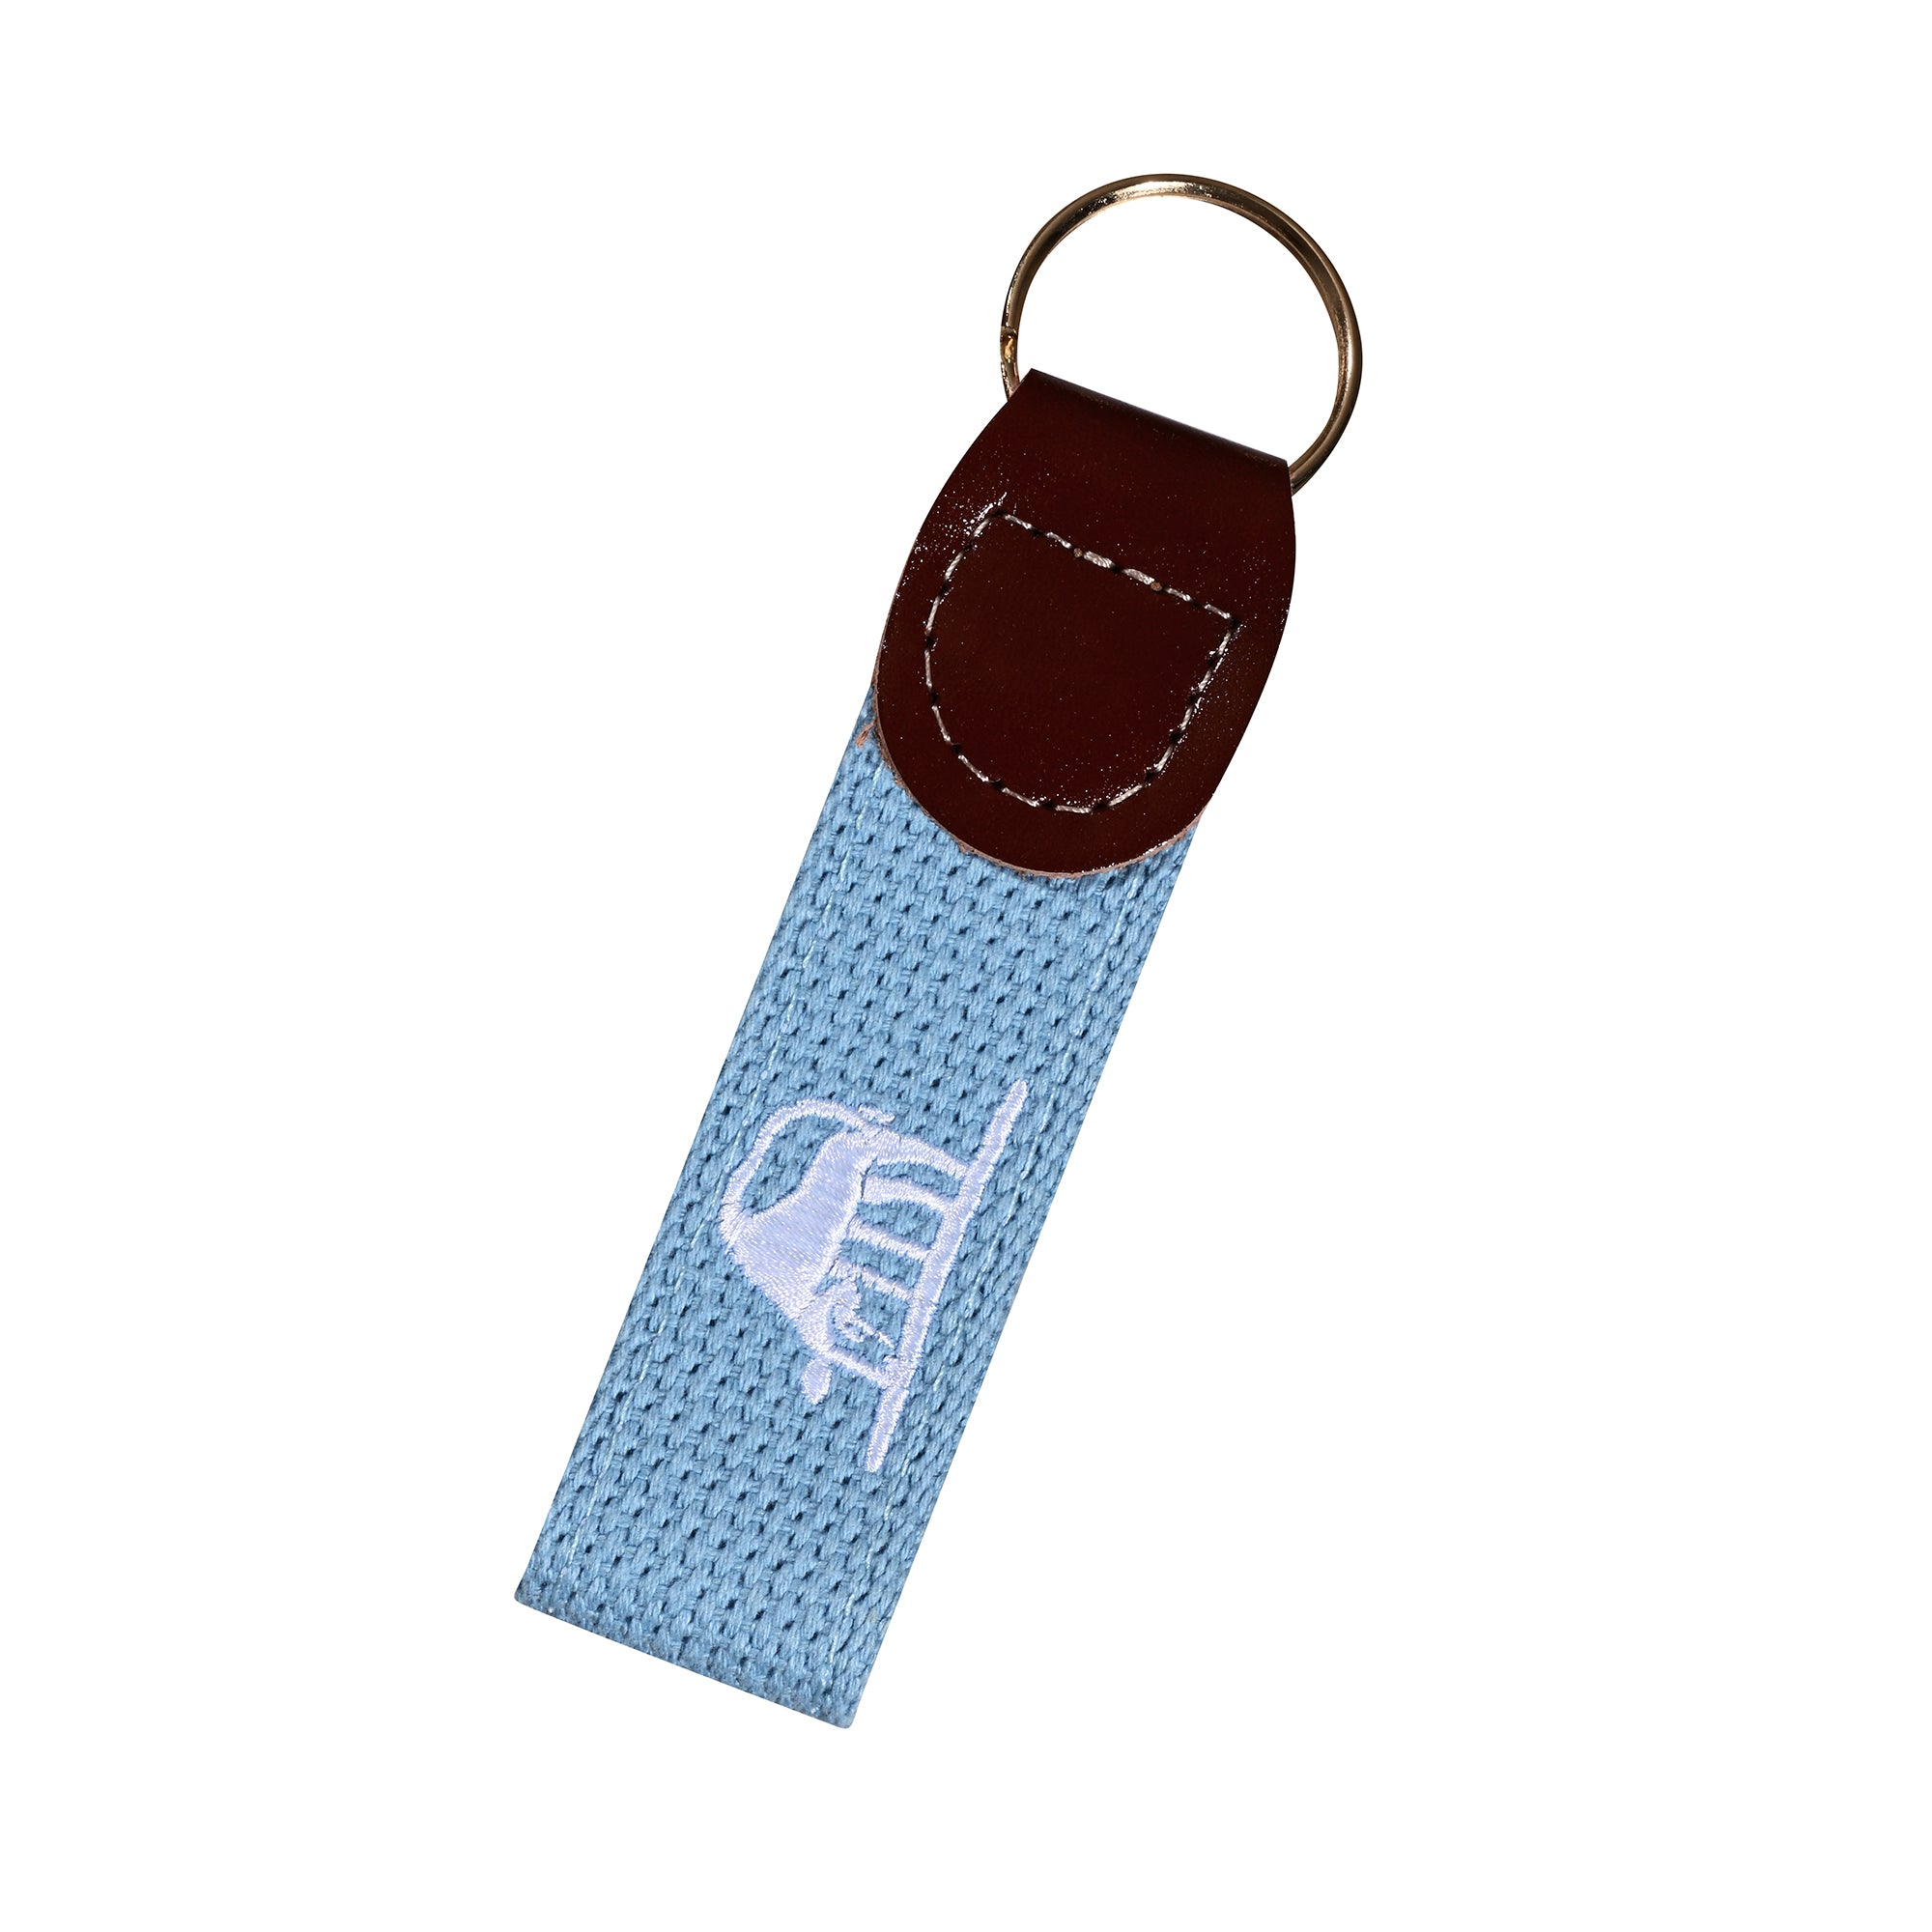 Keyring Jumby Bay Island Hotel Luxury Travel Oetker Collection Boutique Accessories Travel Destination West Indies 